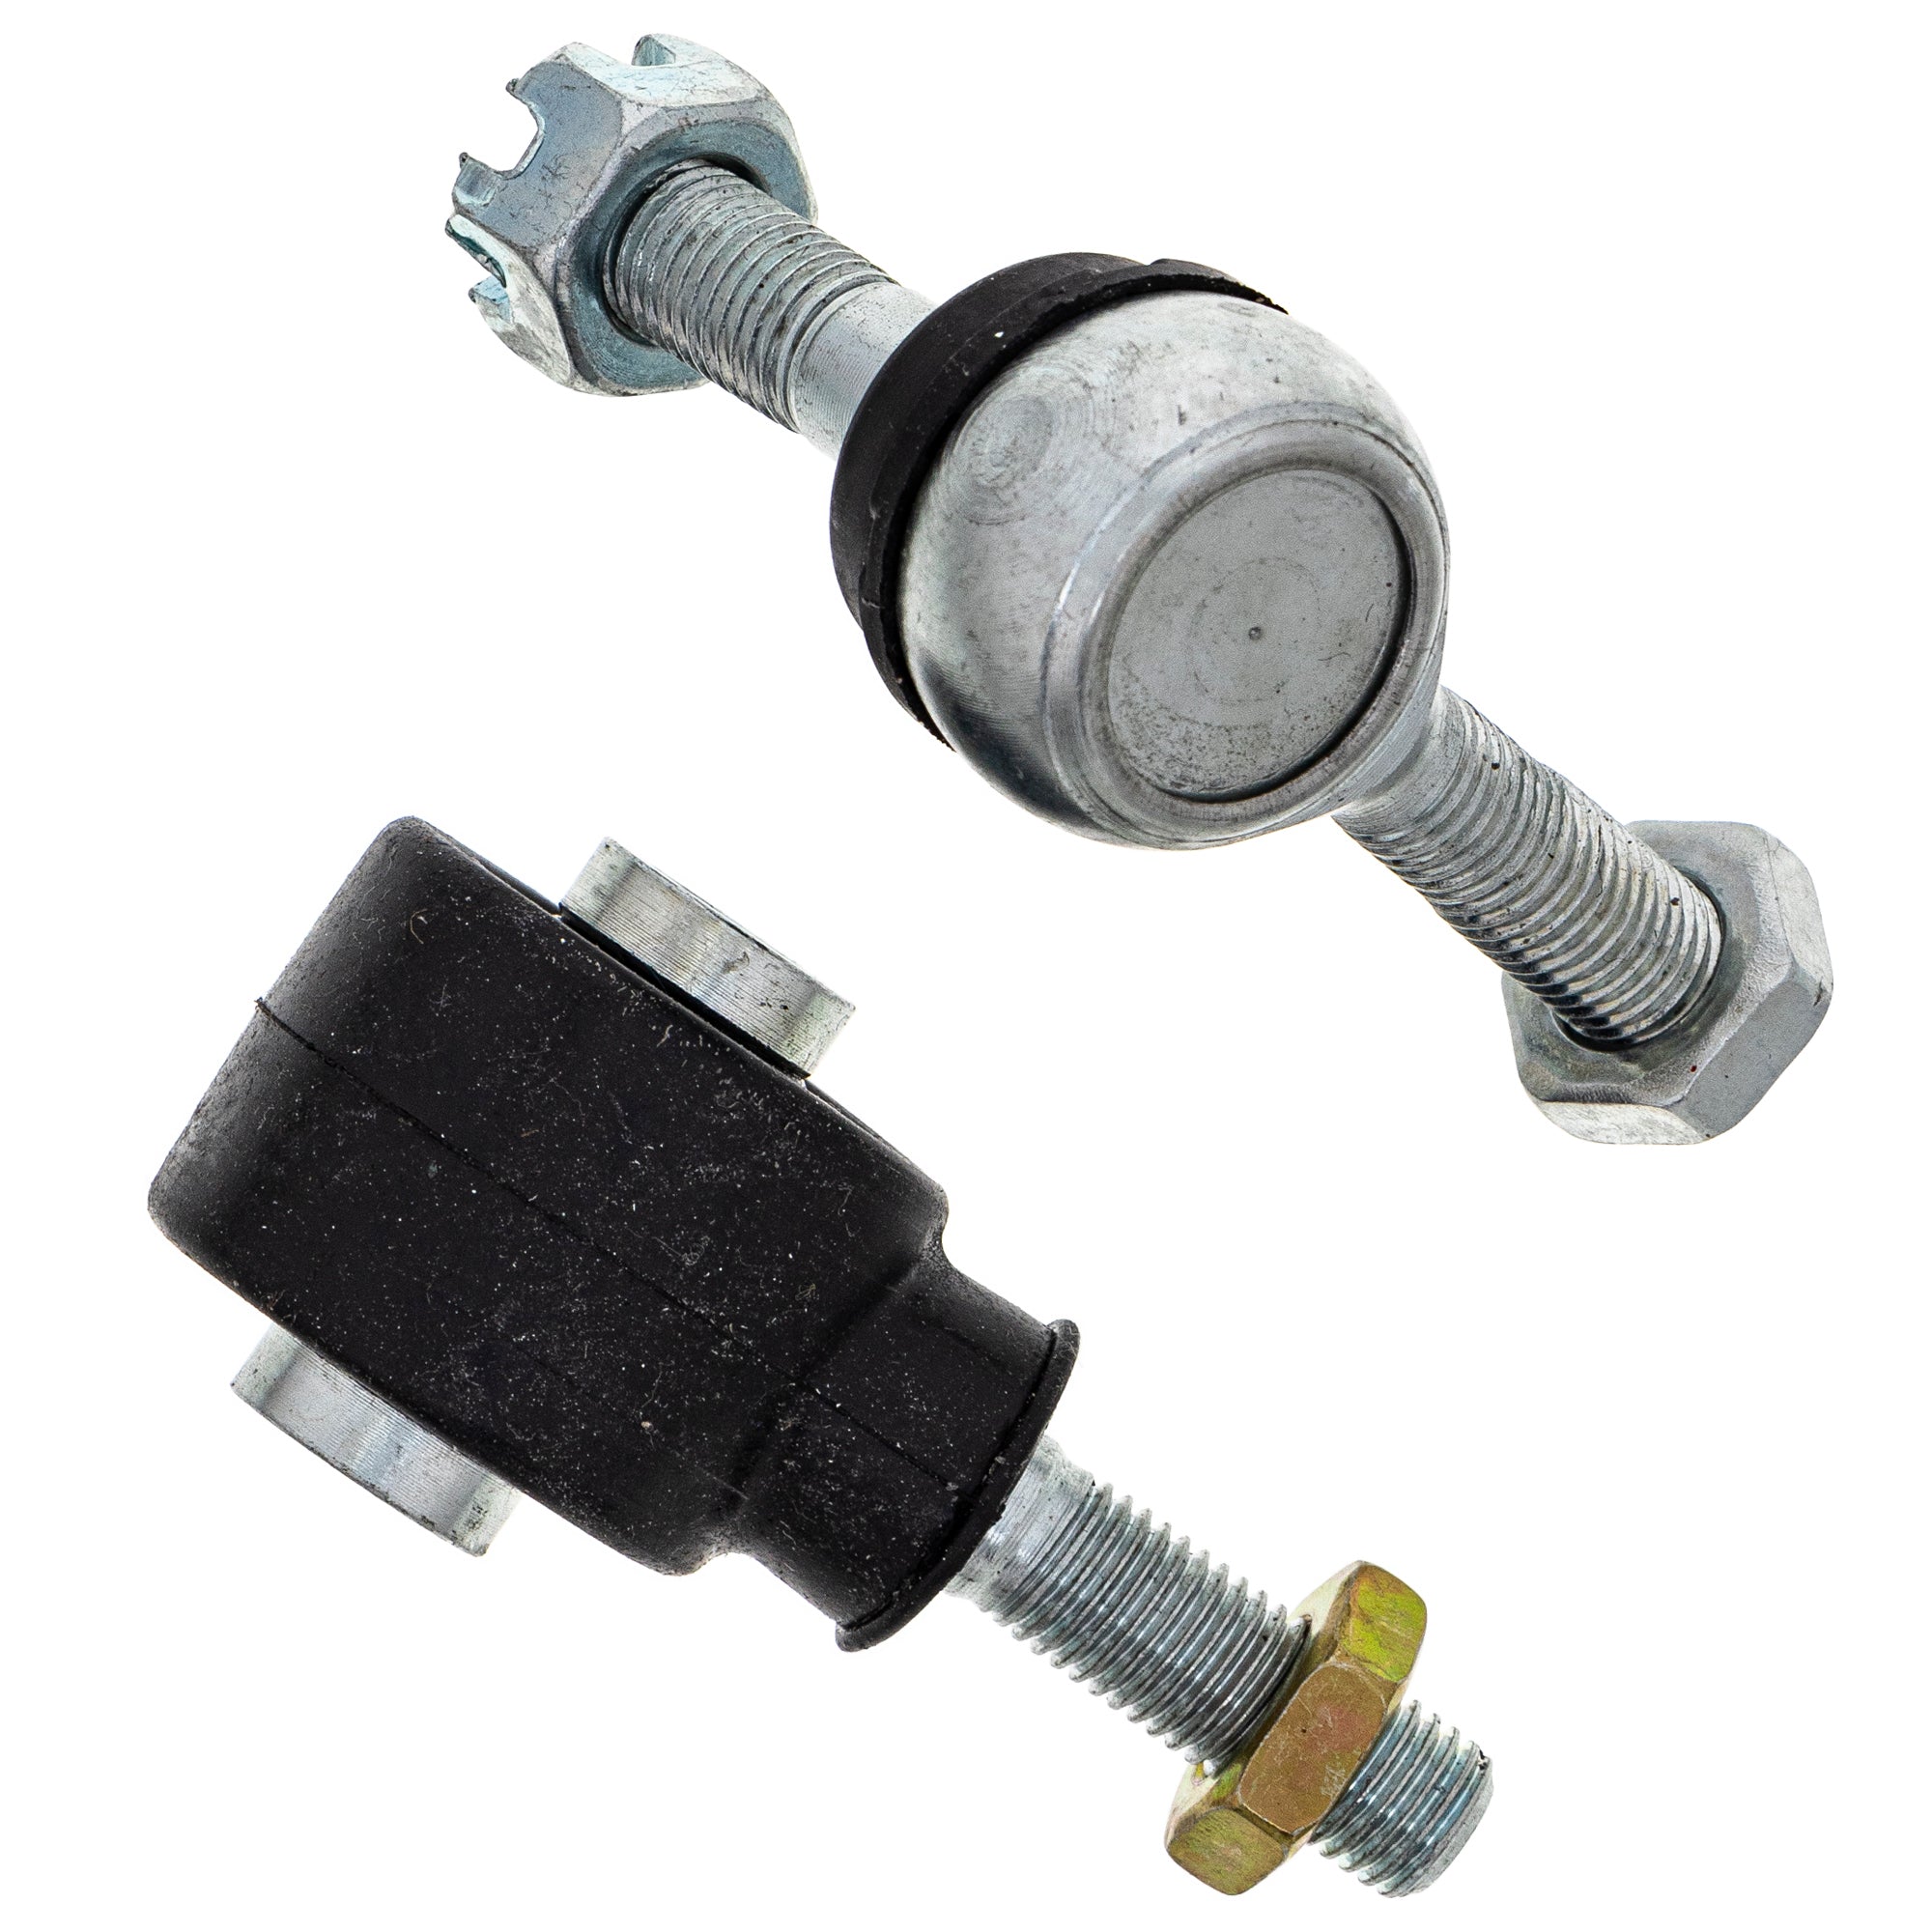 Tie Rod End Ball Joint Kit For Polaris 7061171 7061143 7061140